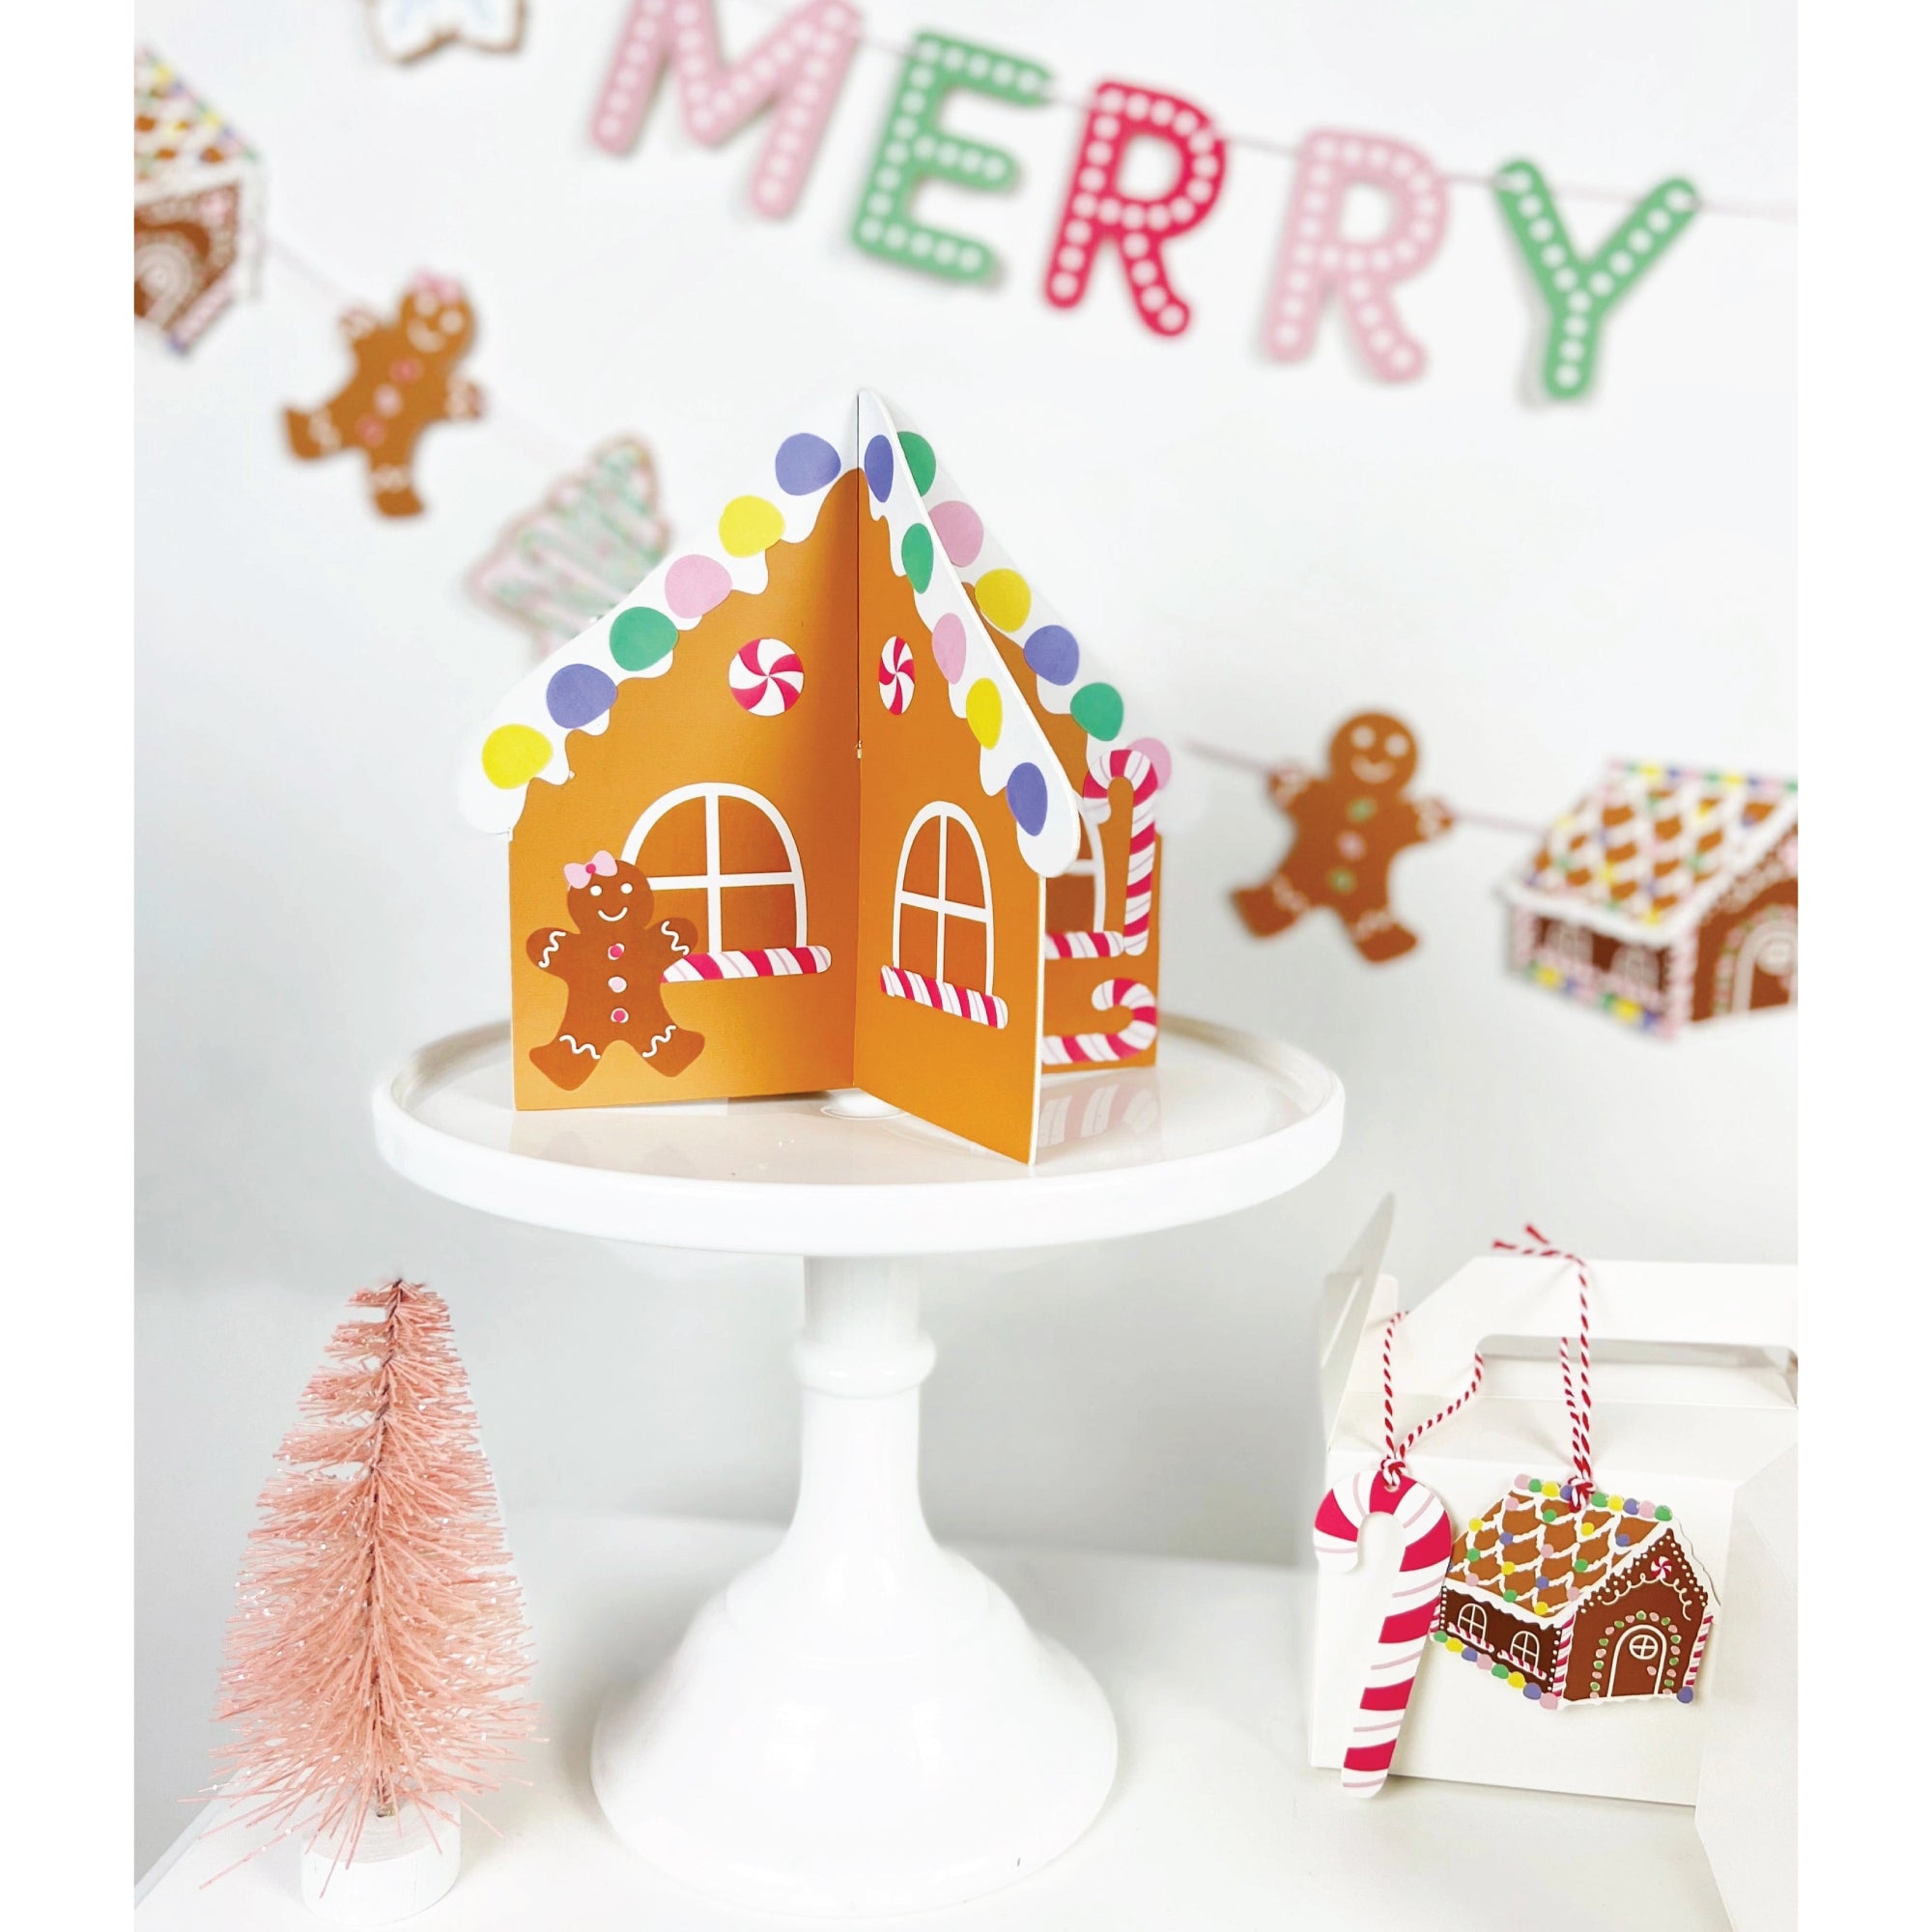 DIY Gingerbread House | The Party Darling